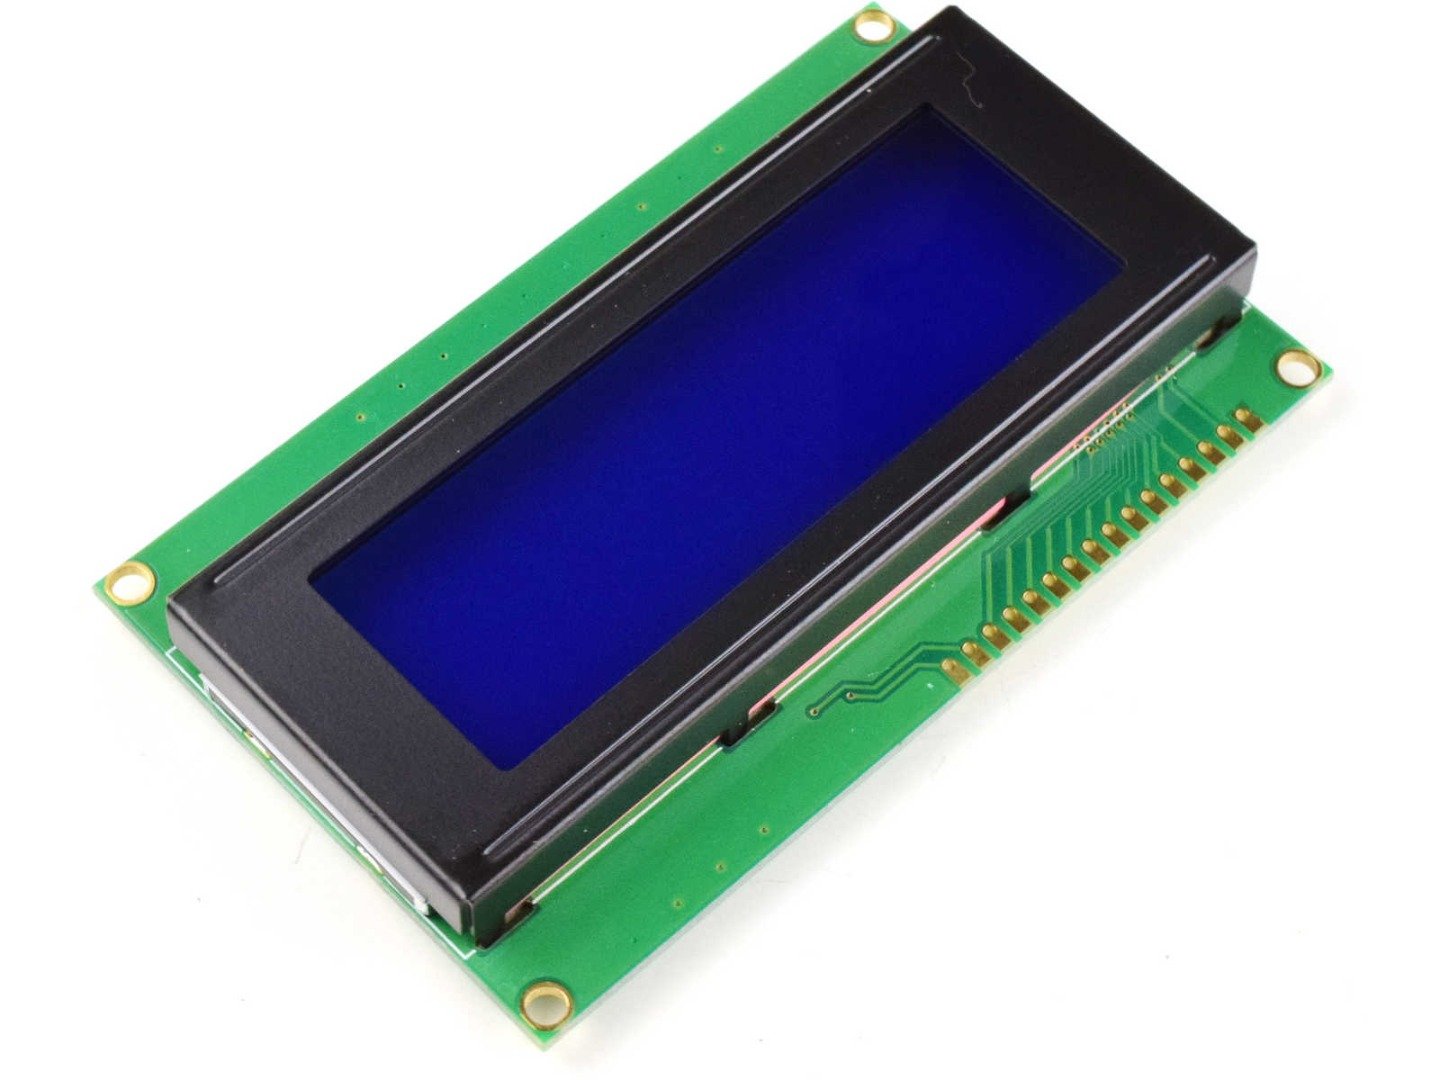 LCD 2004 20×4 Blue, White Backlight, parallel or I2C serial 4